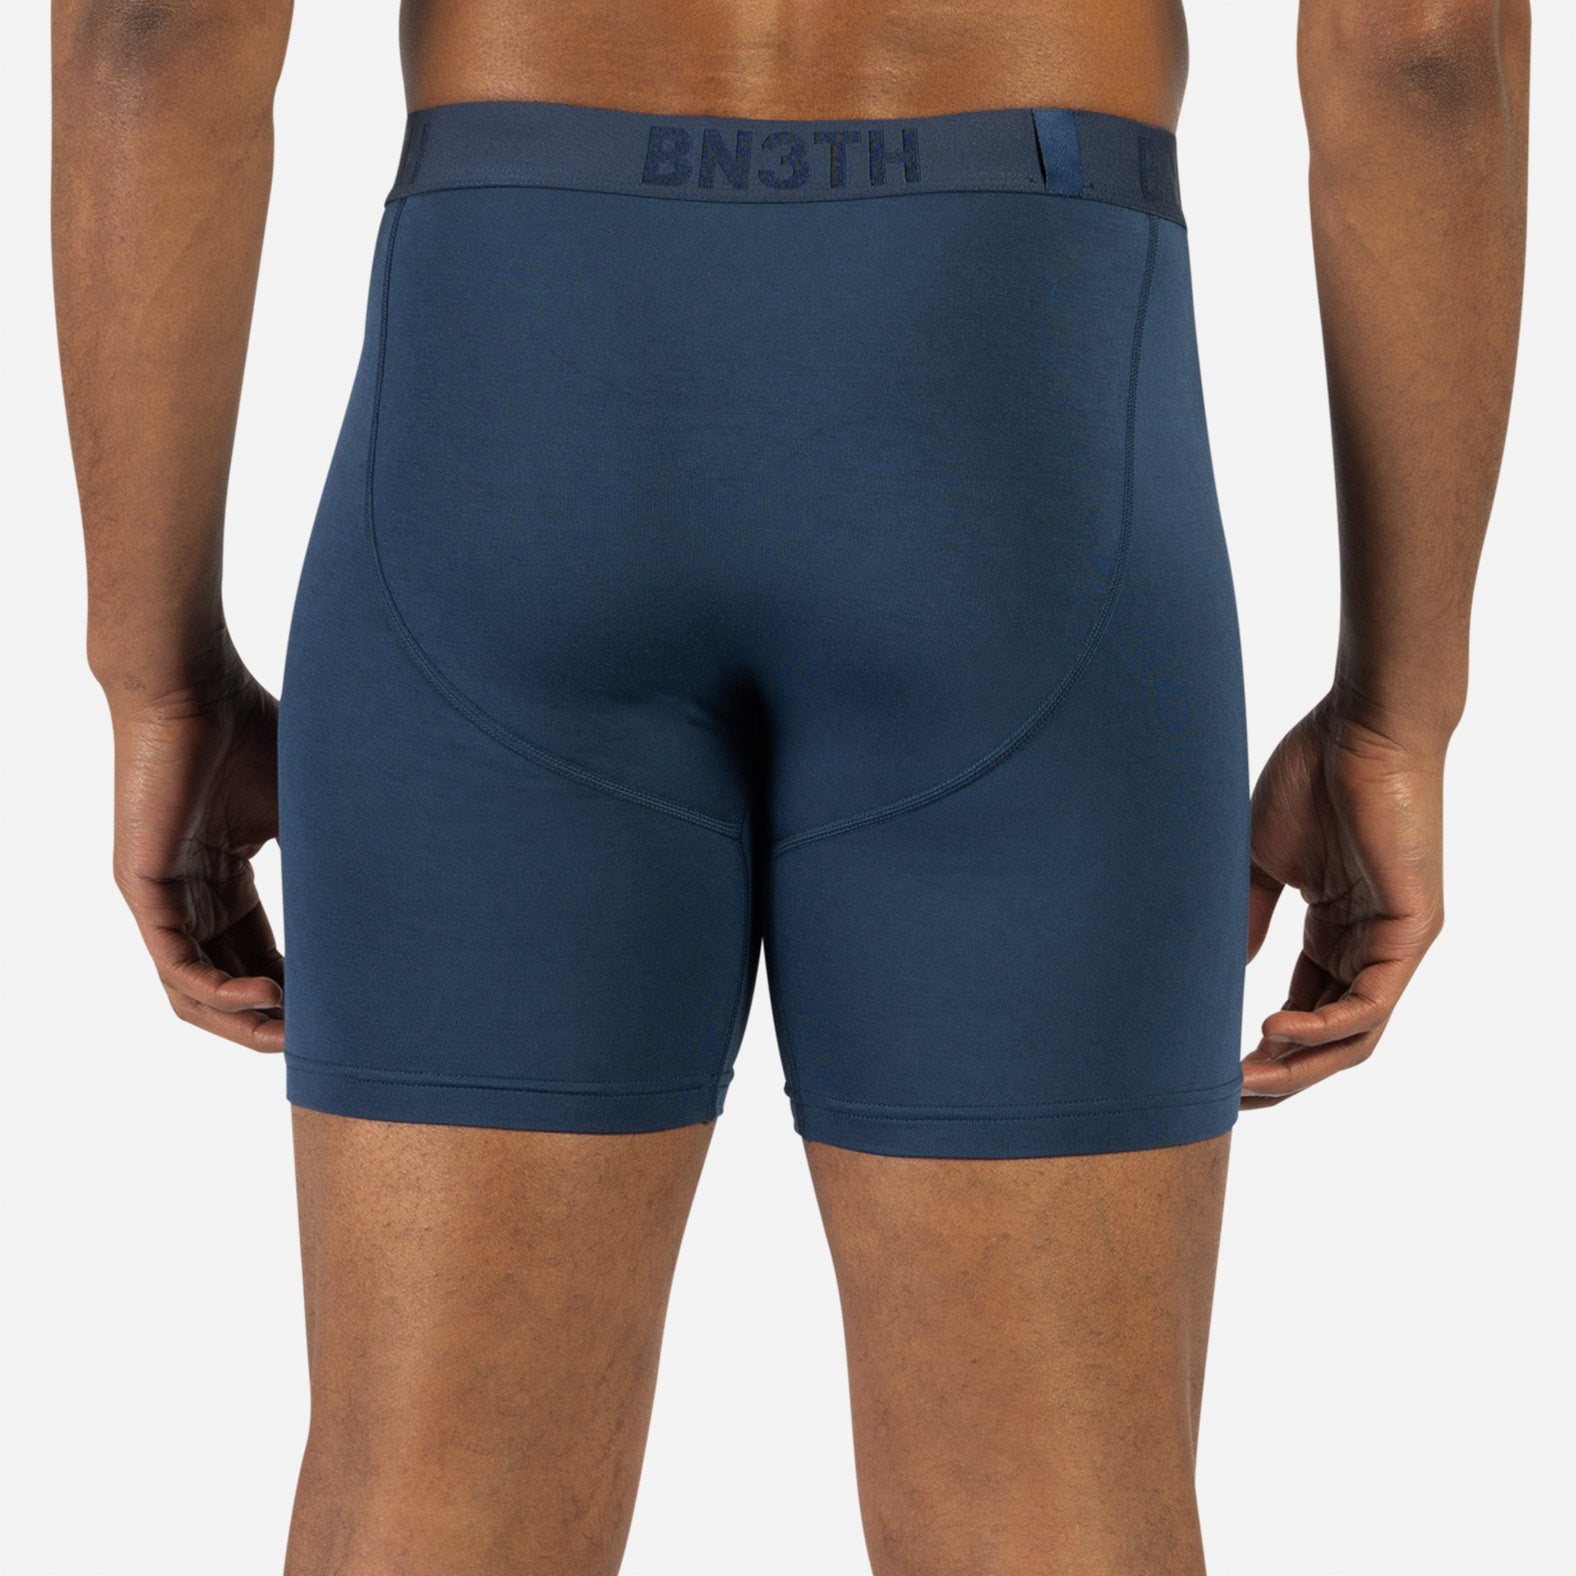 CLASSIC BOXER BRIEF: NAVY/HEATHER CHARCOAL/CAMO GREEN 3 PACK